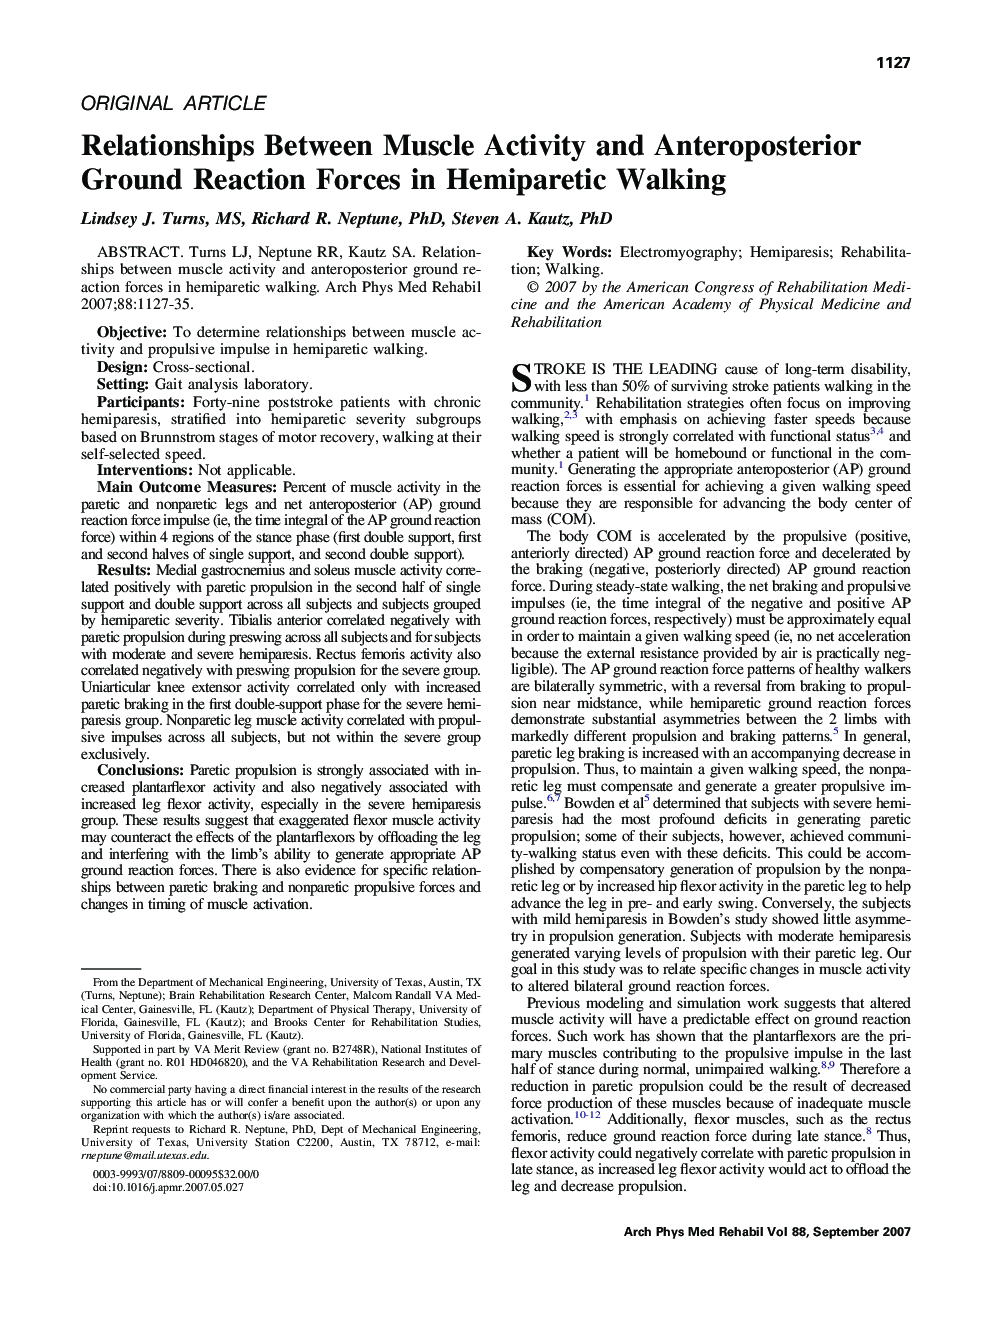 Relationships Between Muscle Activity and Anteroposterior Ground Reaction Forces in Hemiparetic Walking 